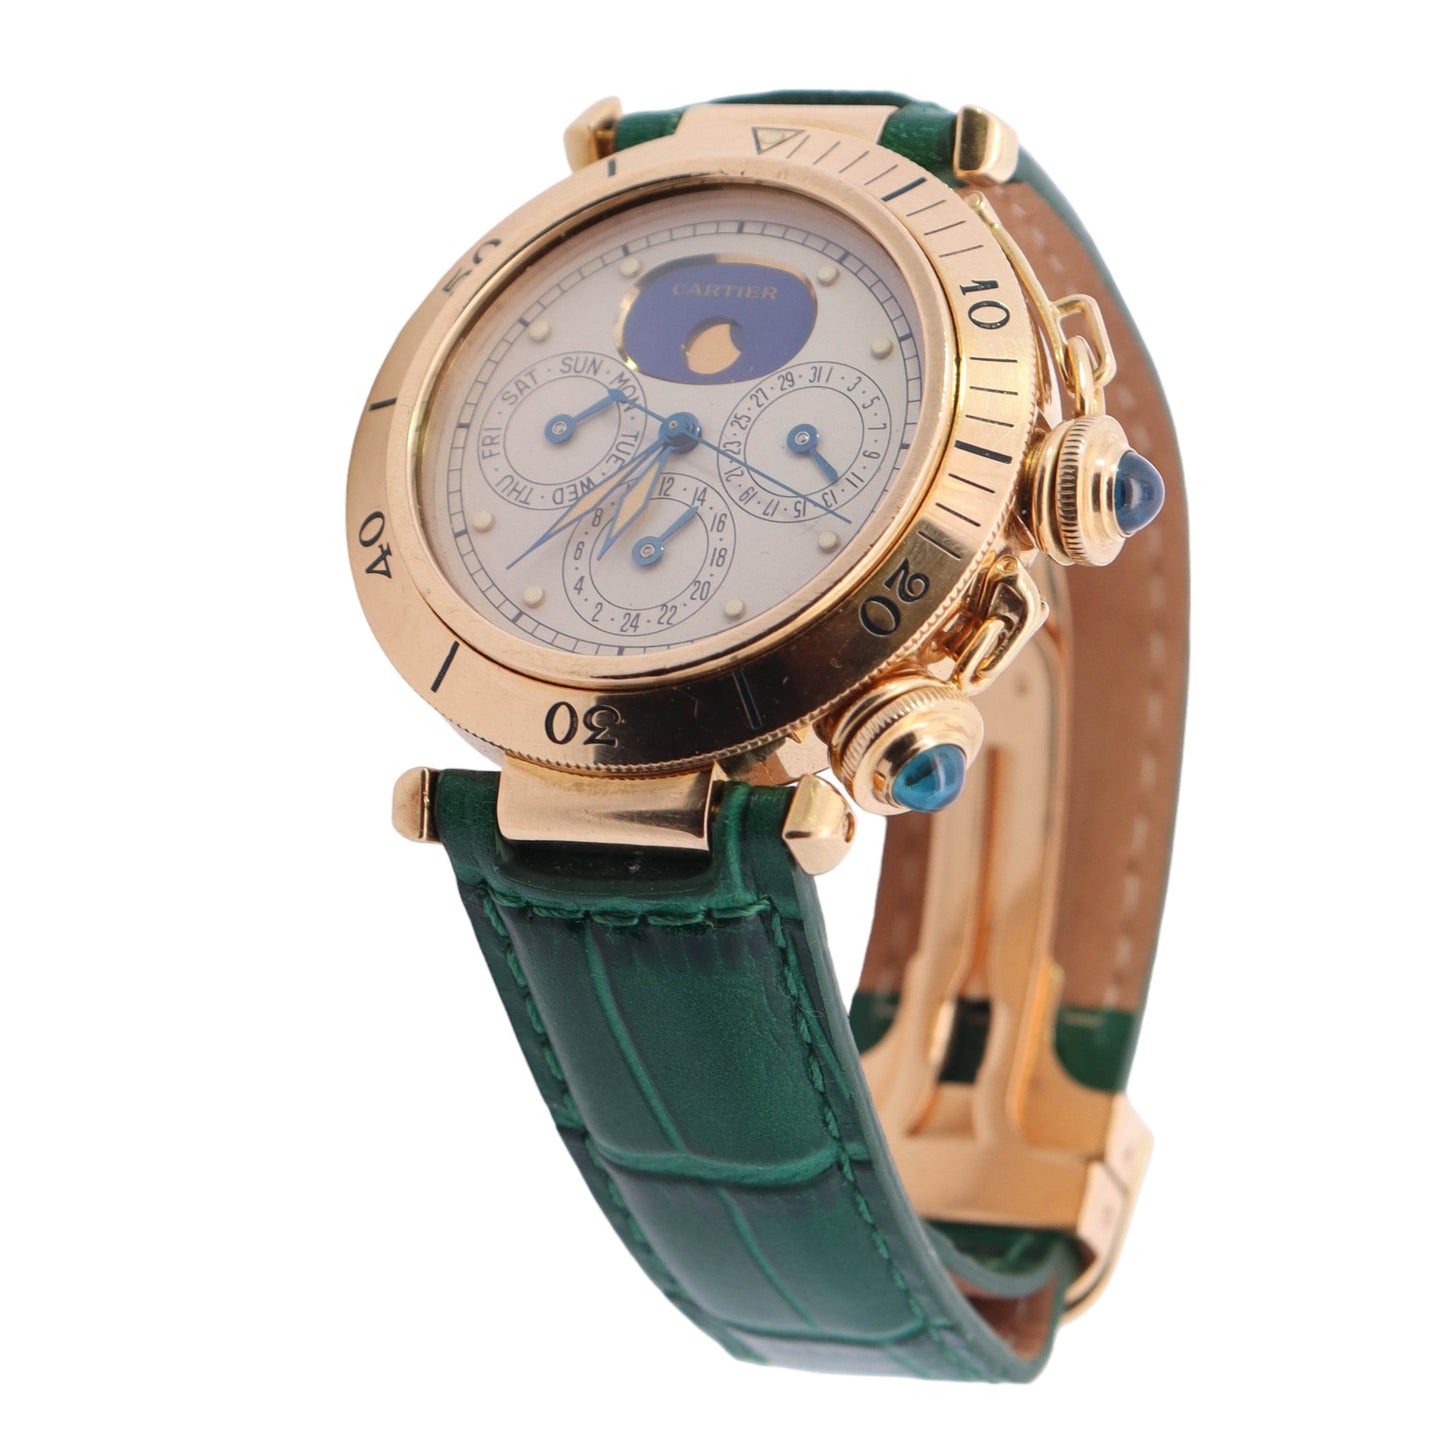 Cartier Pasha De Cartier Moonphase Dual Time Zone 18k Yellow Gold 38mm Ivory Moonphase Dot Dial Watch Reference #: 30002